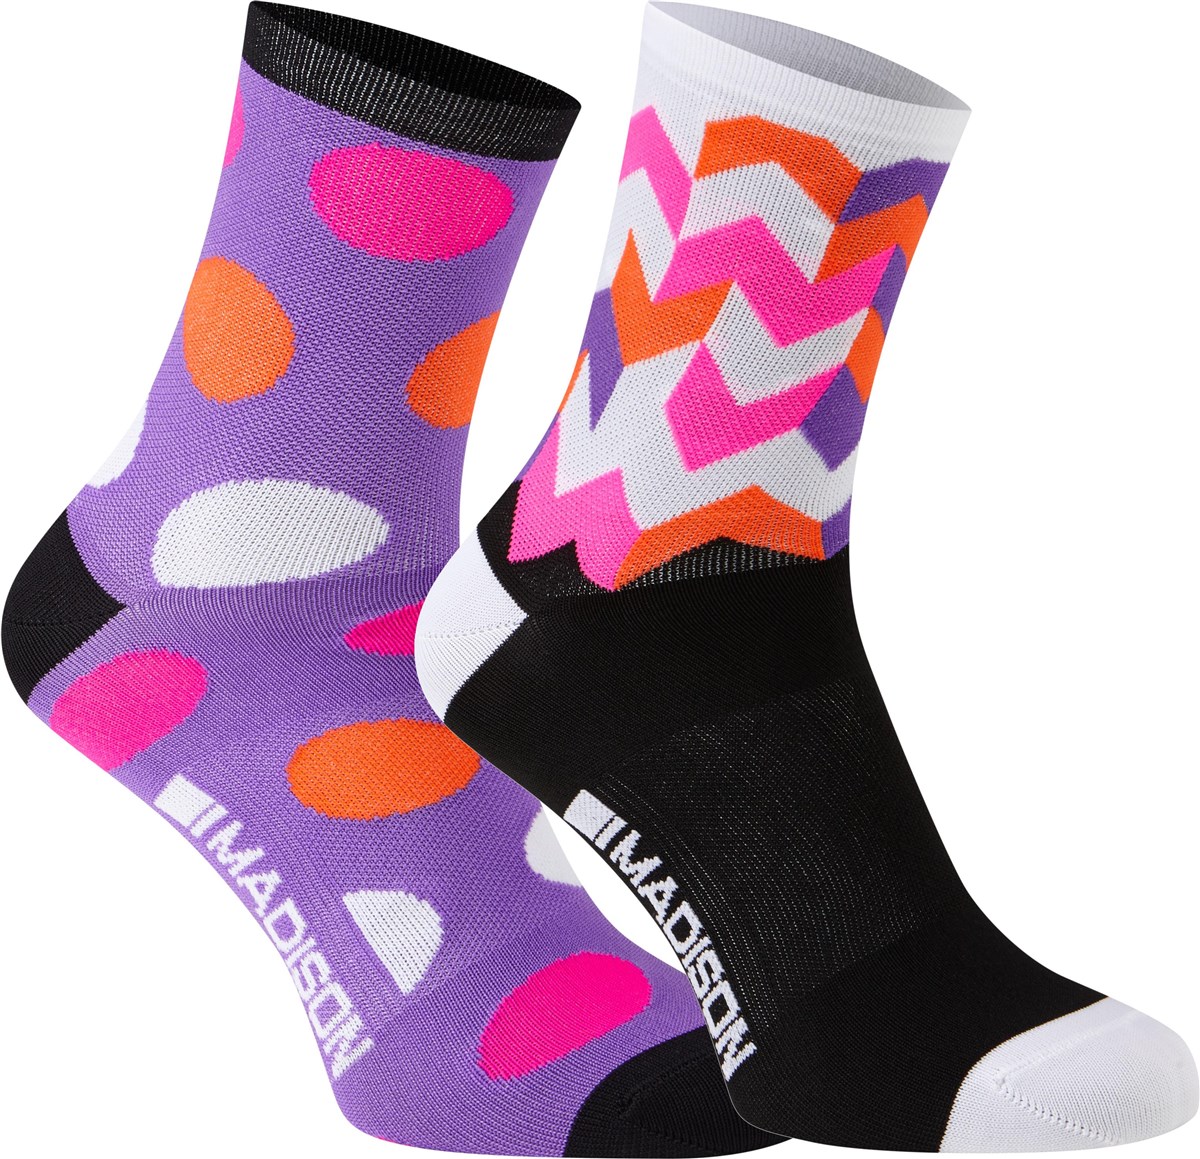 Madison Sportive Womens Mid Socks - Pack of 2